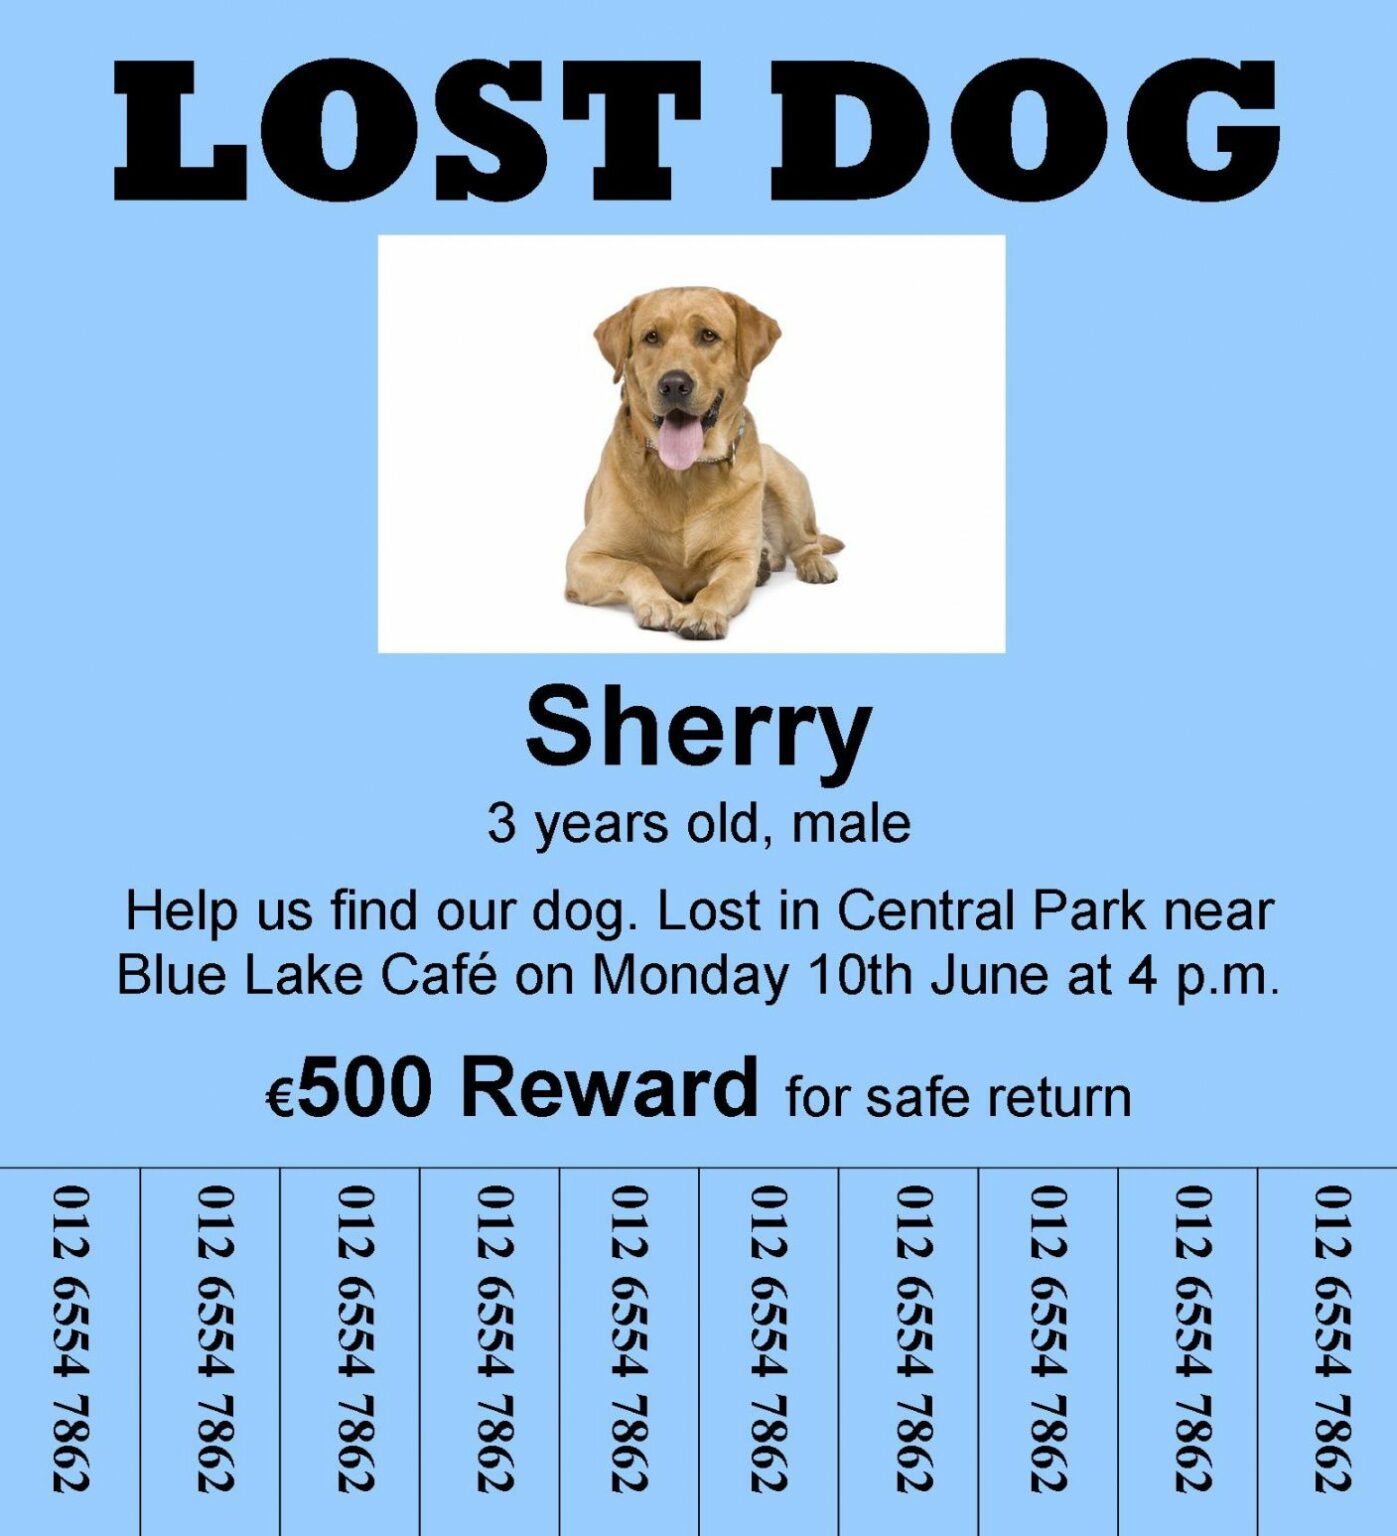 Free Reading A Lost Dog A2 Educateninja Found Dog Flyer Template